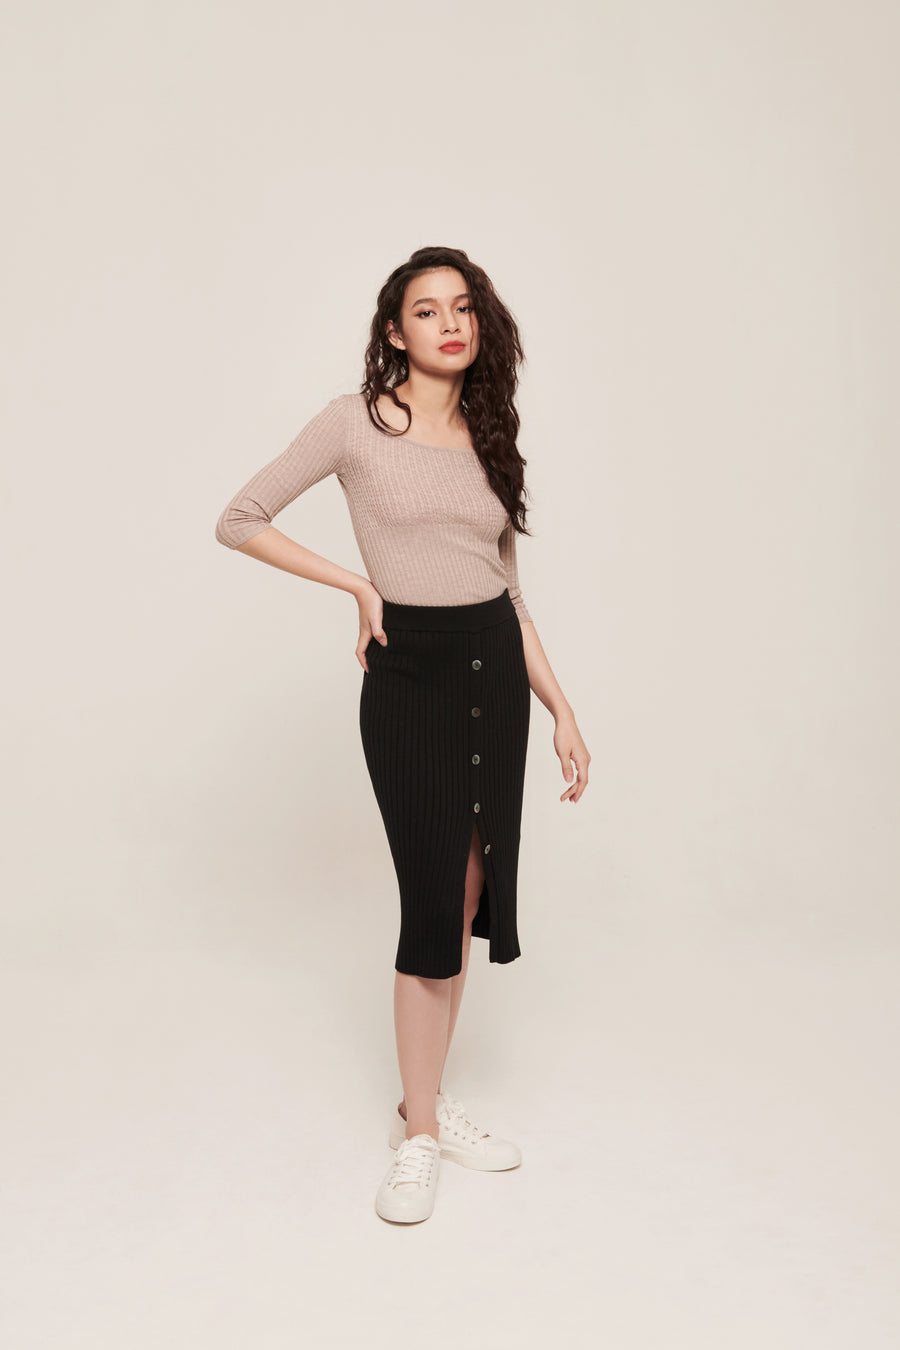 hello ronron | Agnes Top Latte | Scoop neck cable ribbed knit top